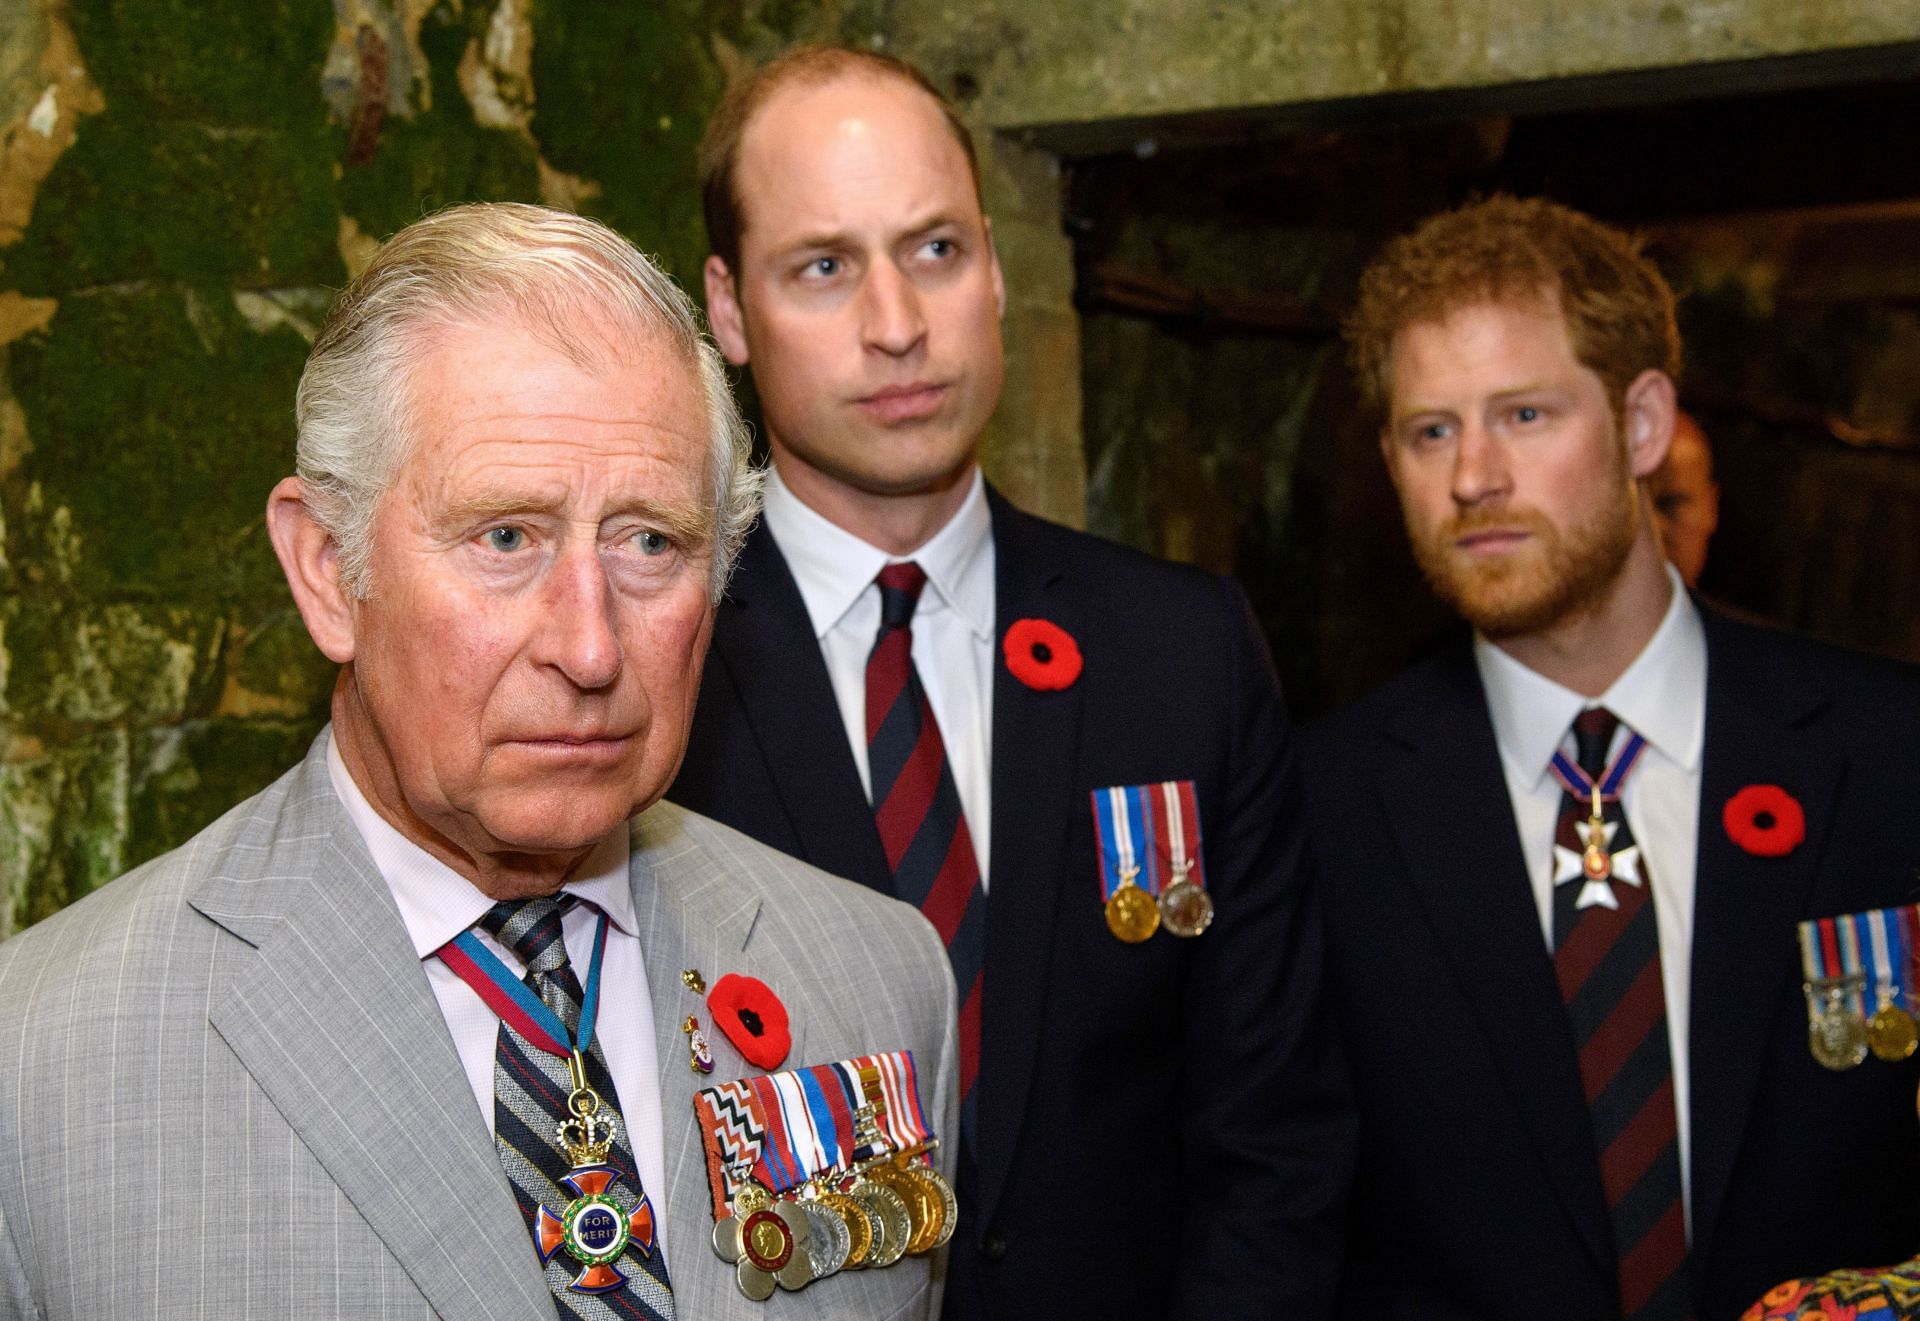 King Charles III, Prince William, and Prince Harry (Photo by Tim Rooke - Pool/Getty Images)